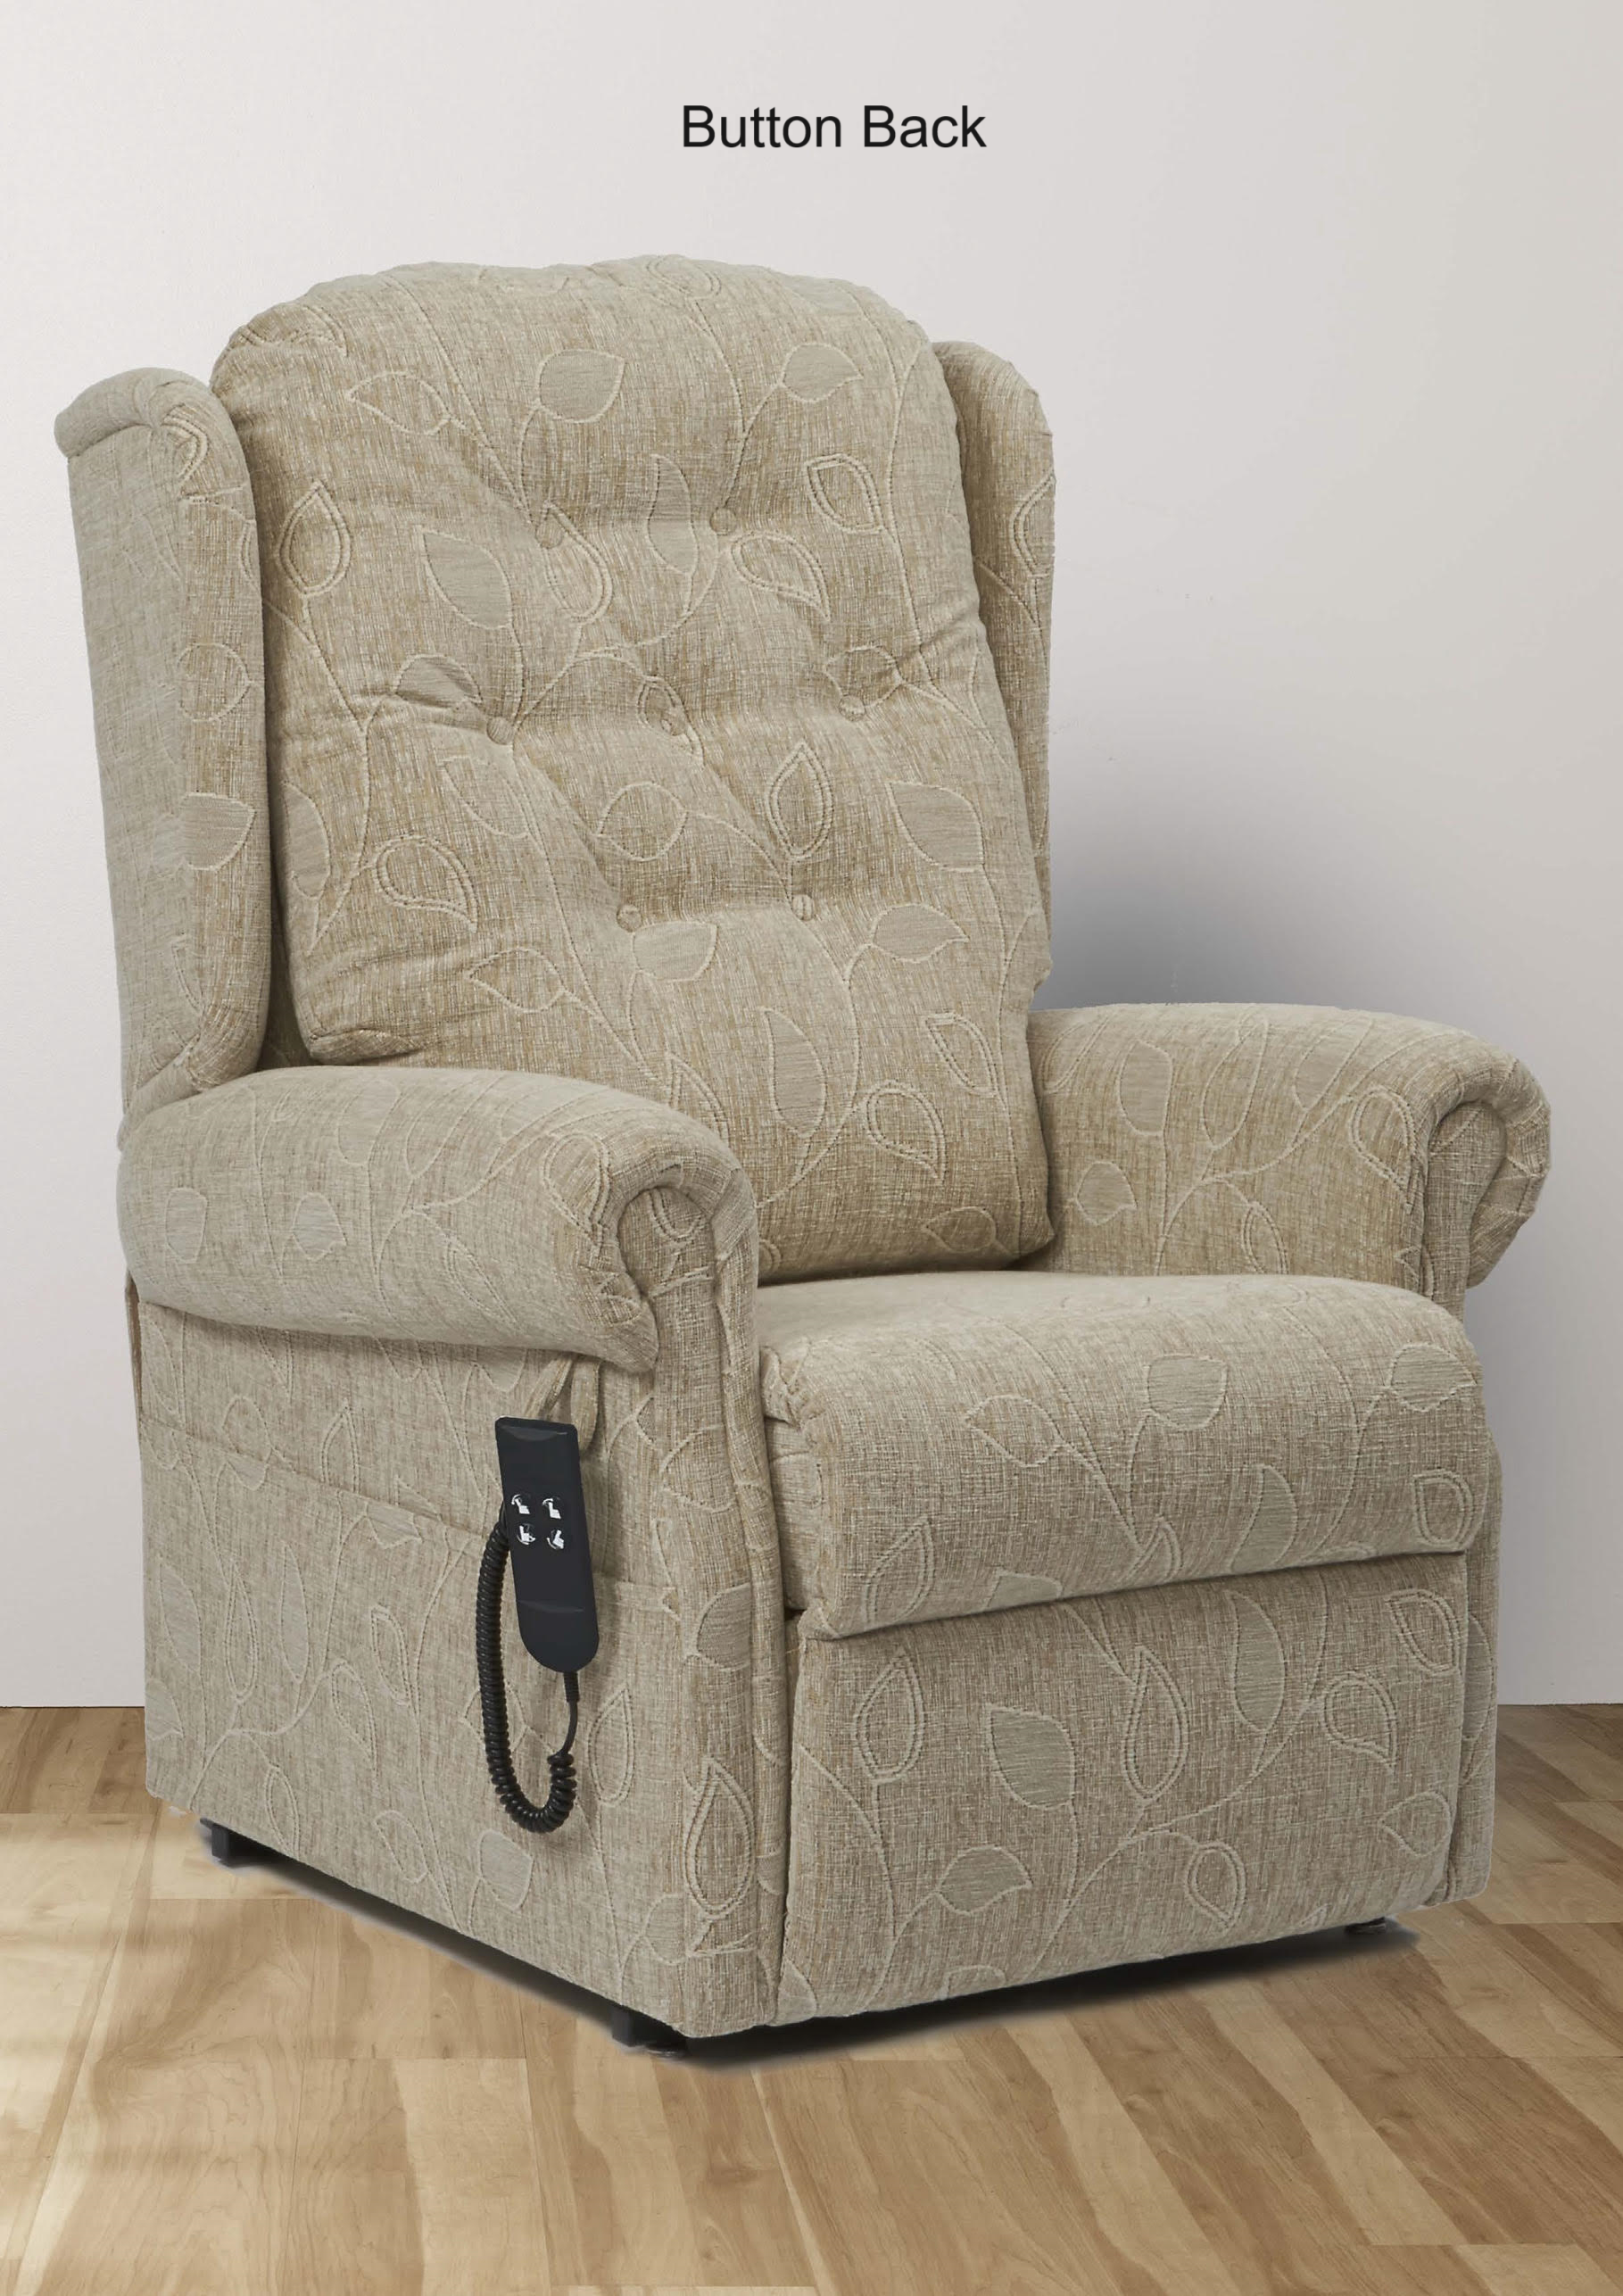 Primacare Brecon Dual Motor Tilt in Space Riser Recline Chair with Button Back